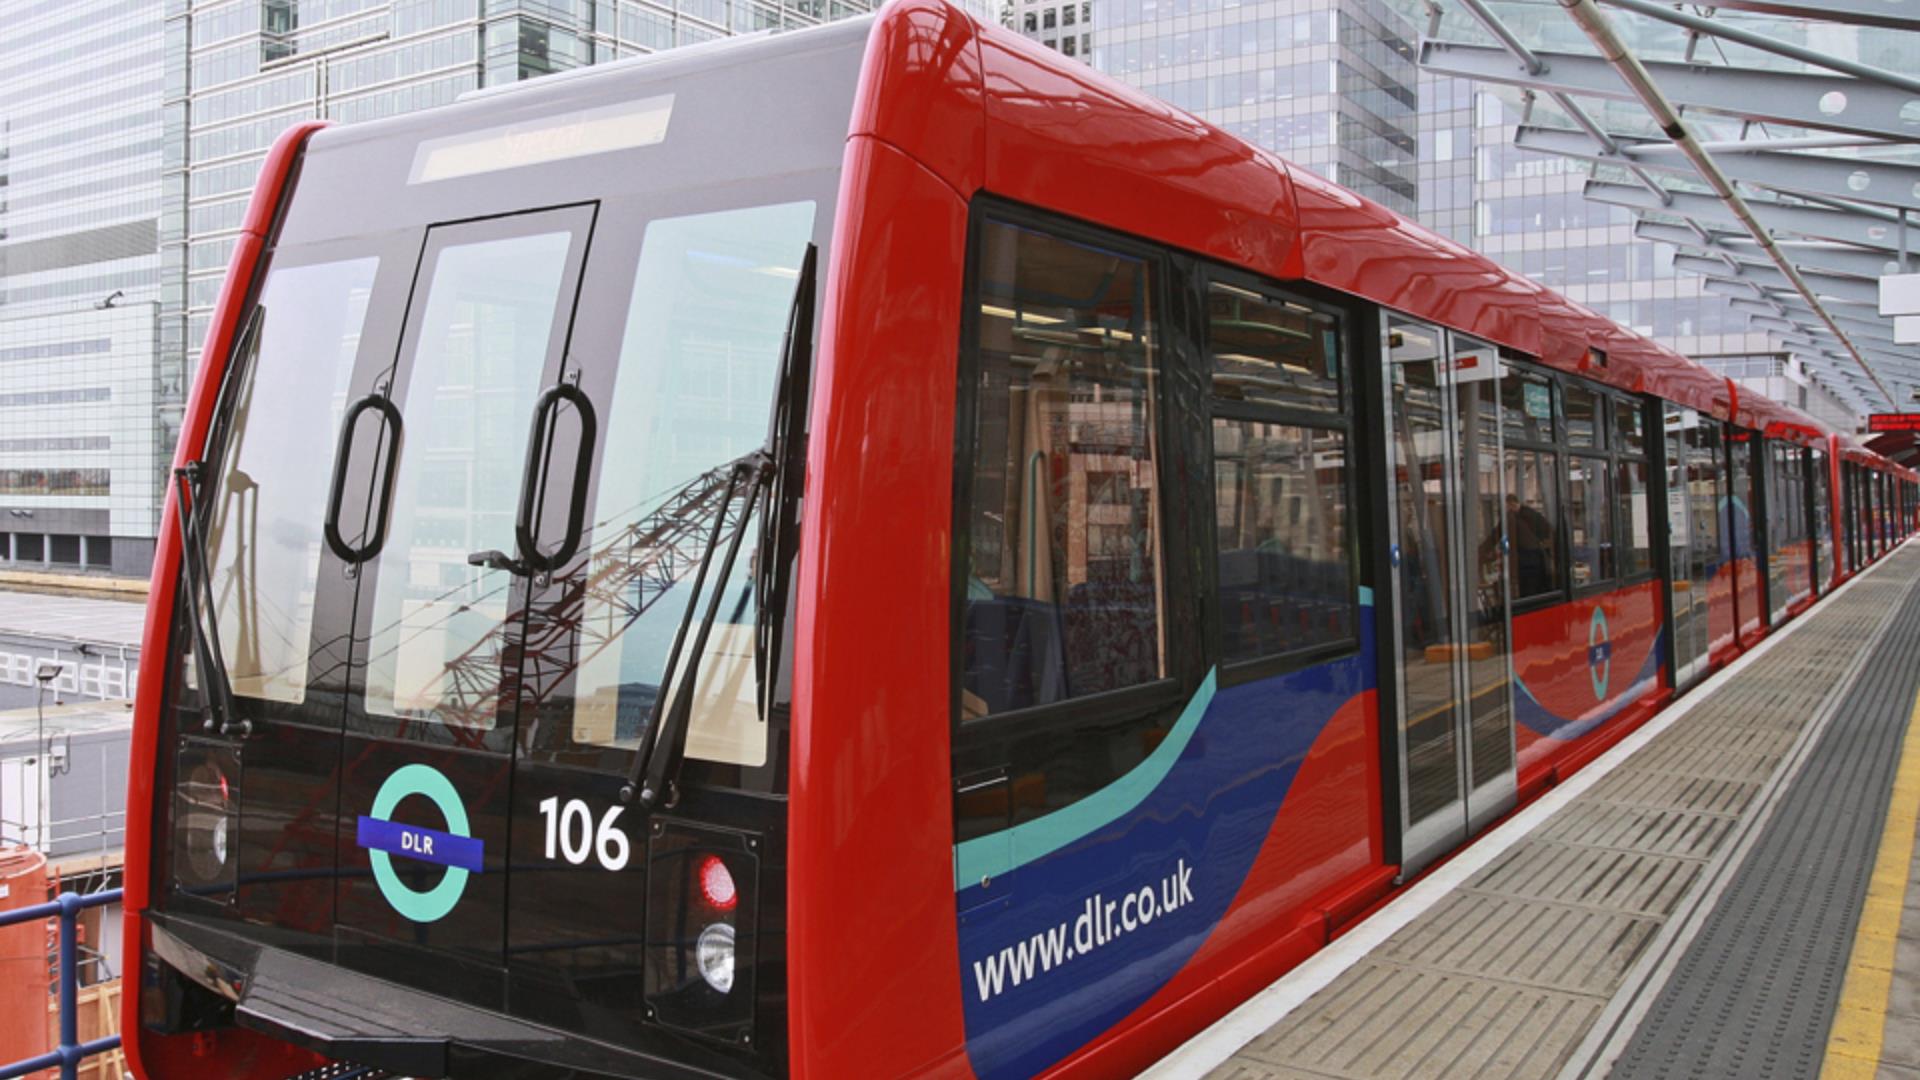 A Docklands Light Railway (DLR) train at a station in Canary Wharf on its way to Greenwich.